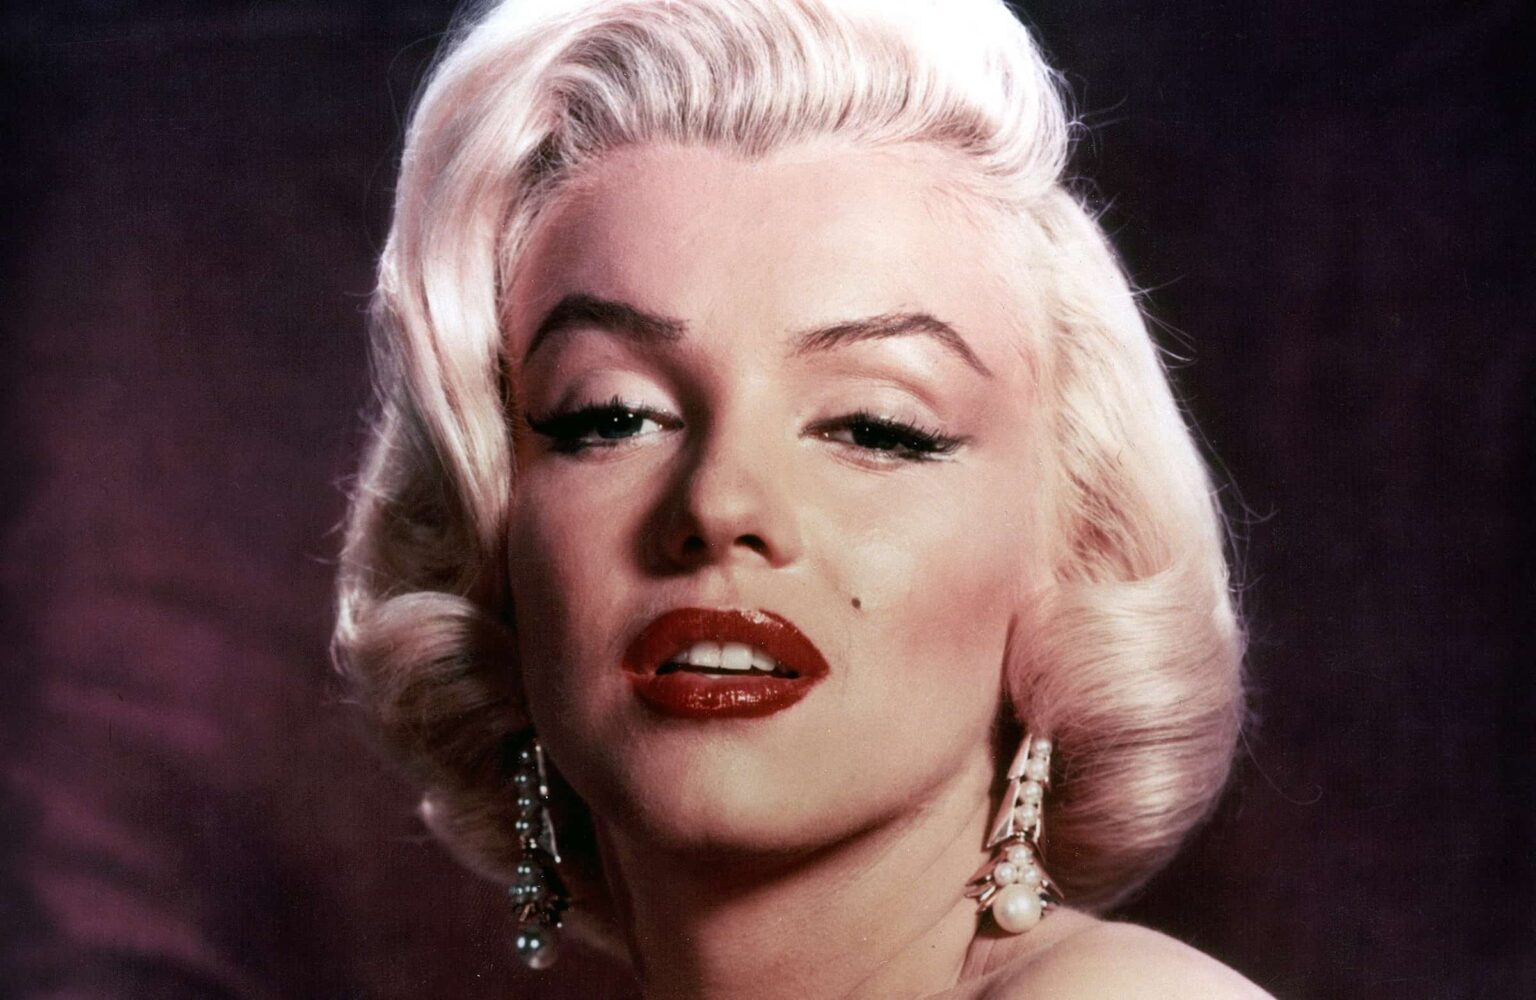 The death of Marilyn Monroe has been discussed as much as most of her movies. Honor her memory by learning about the conspiracies surrounding her demise.